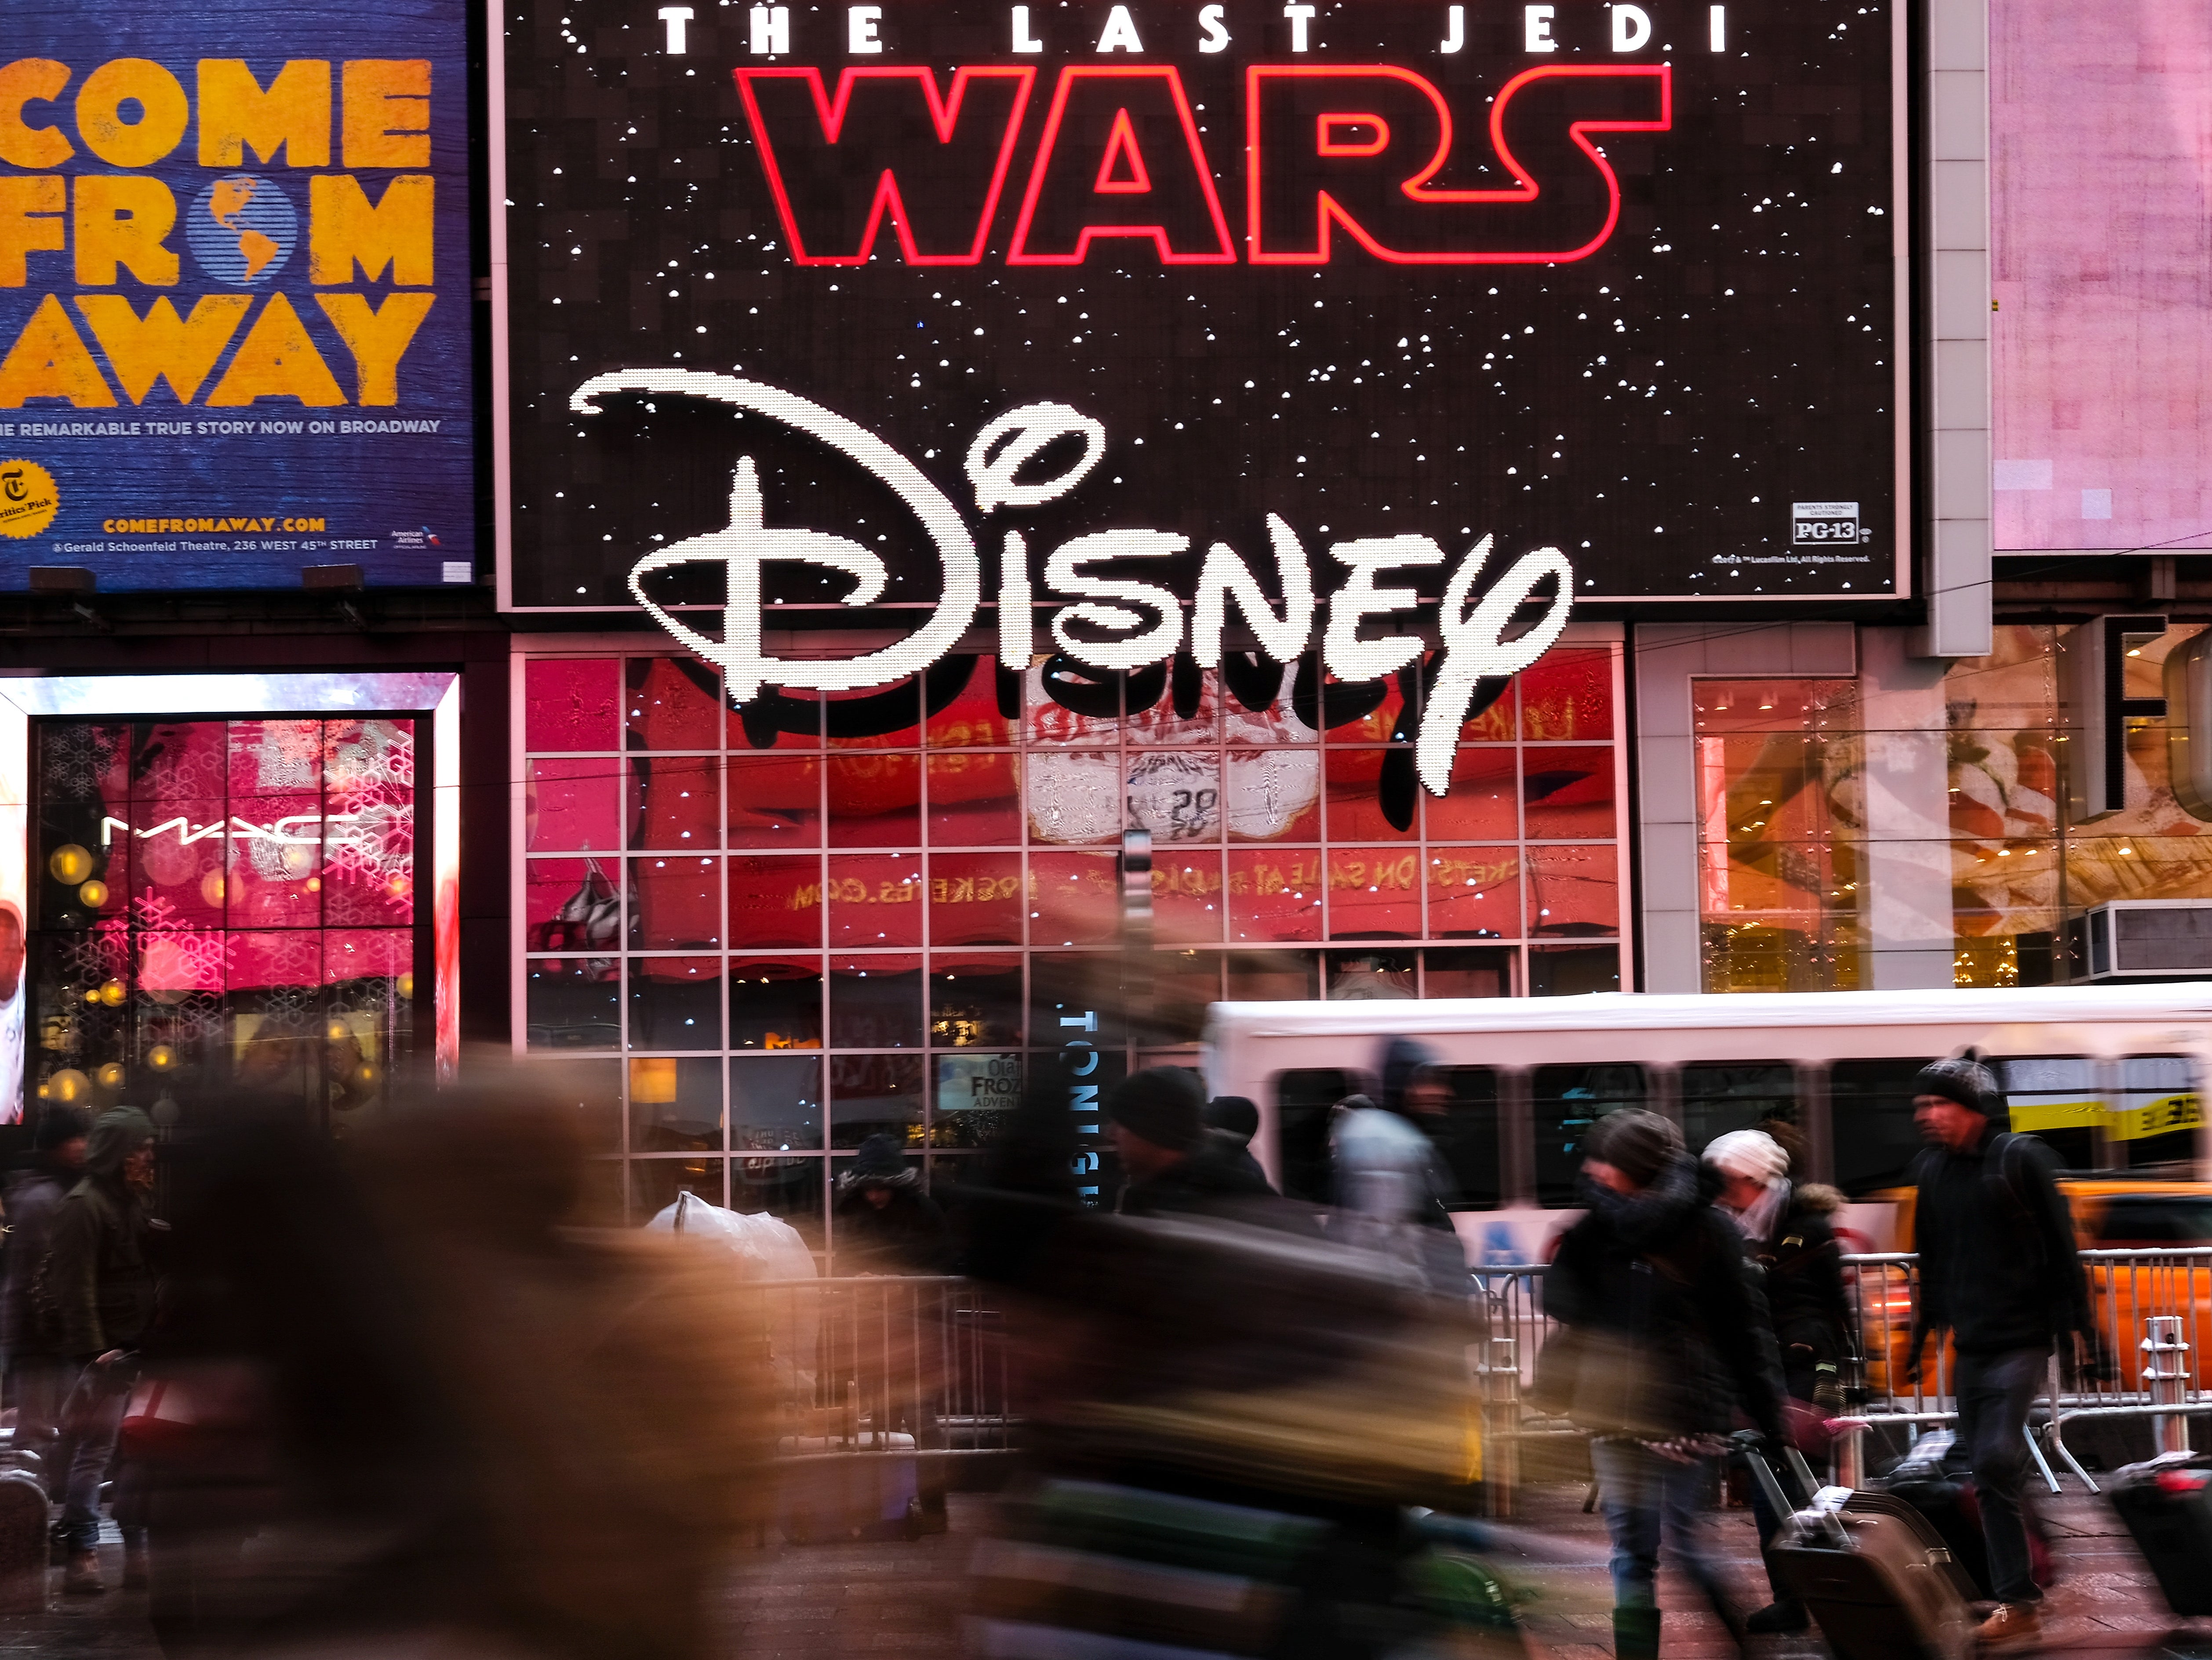 The company’s Star Wars offering is in trouble – time will tell if Iger and a team of Super Creators can save it